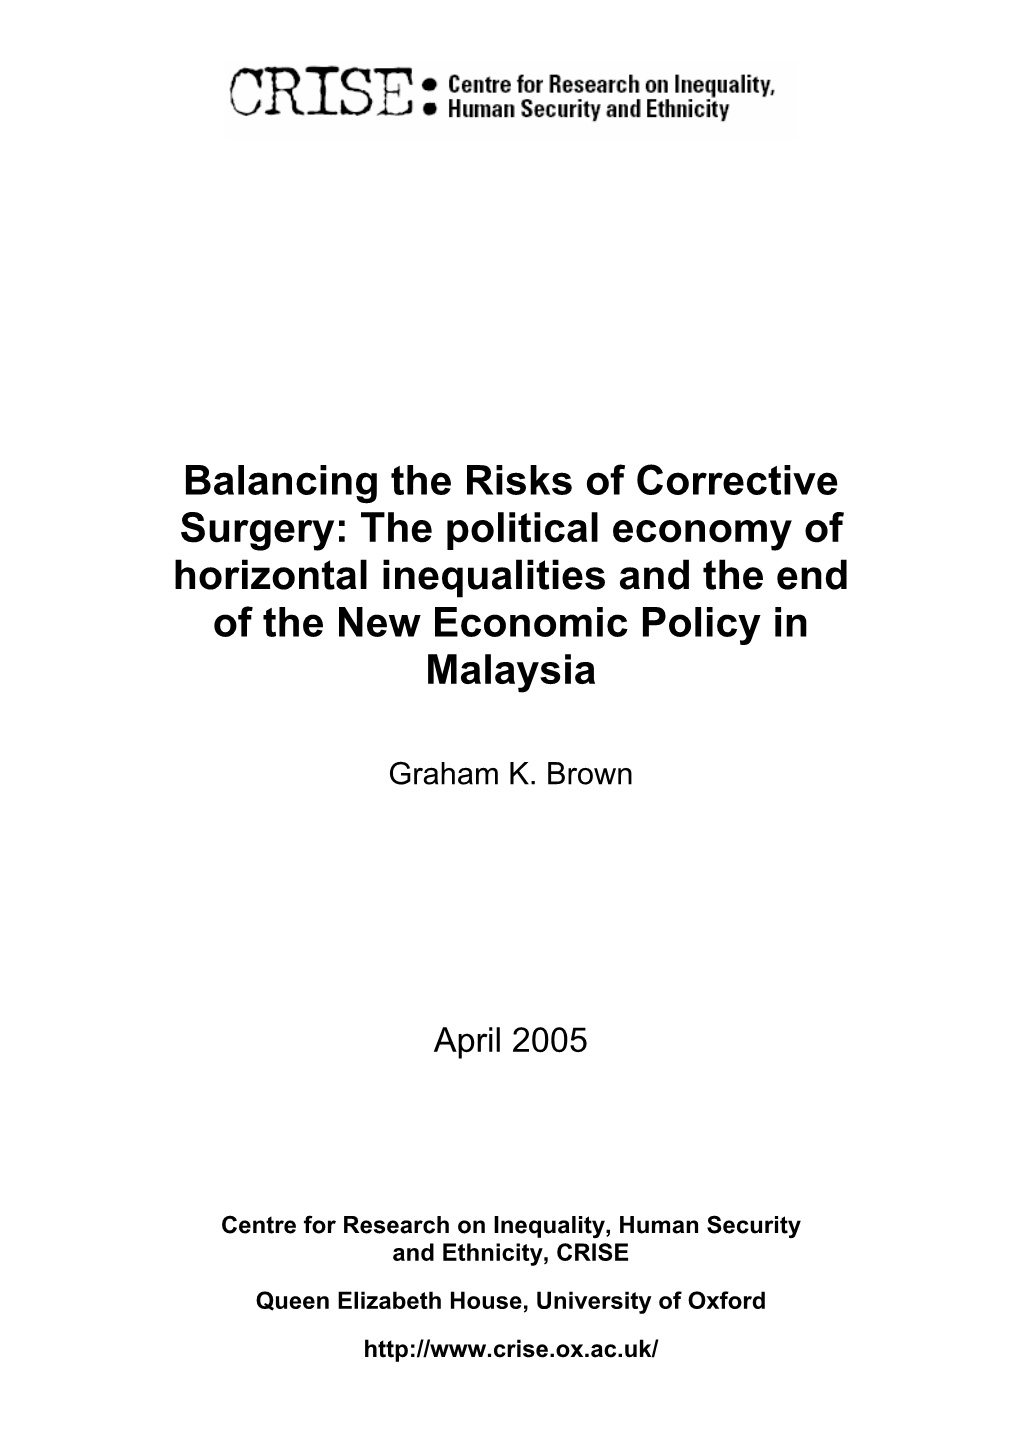 Balancing the Risks of Corrective Surgery: the Political Economy of Horizontal Inequalities and the End of the New Economic Policy in Malaysia